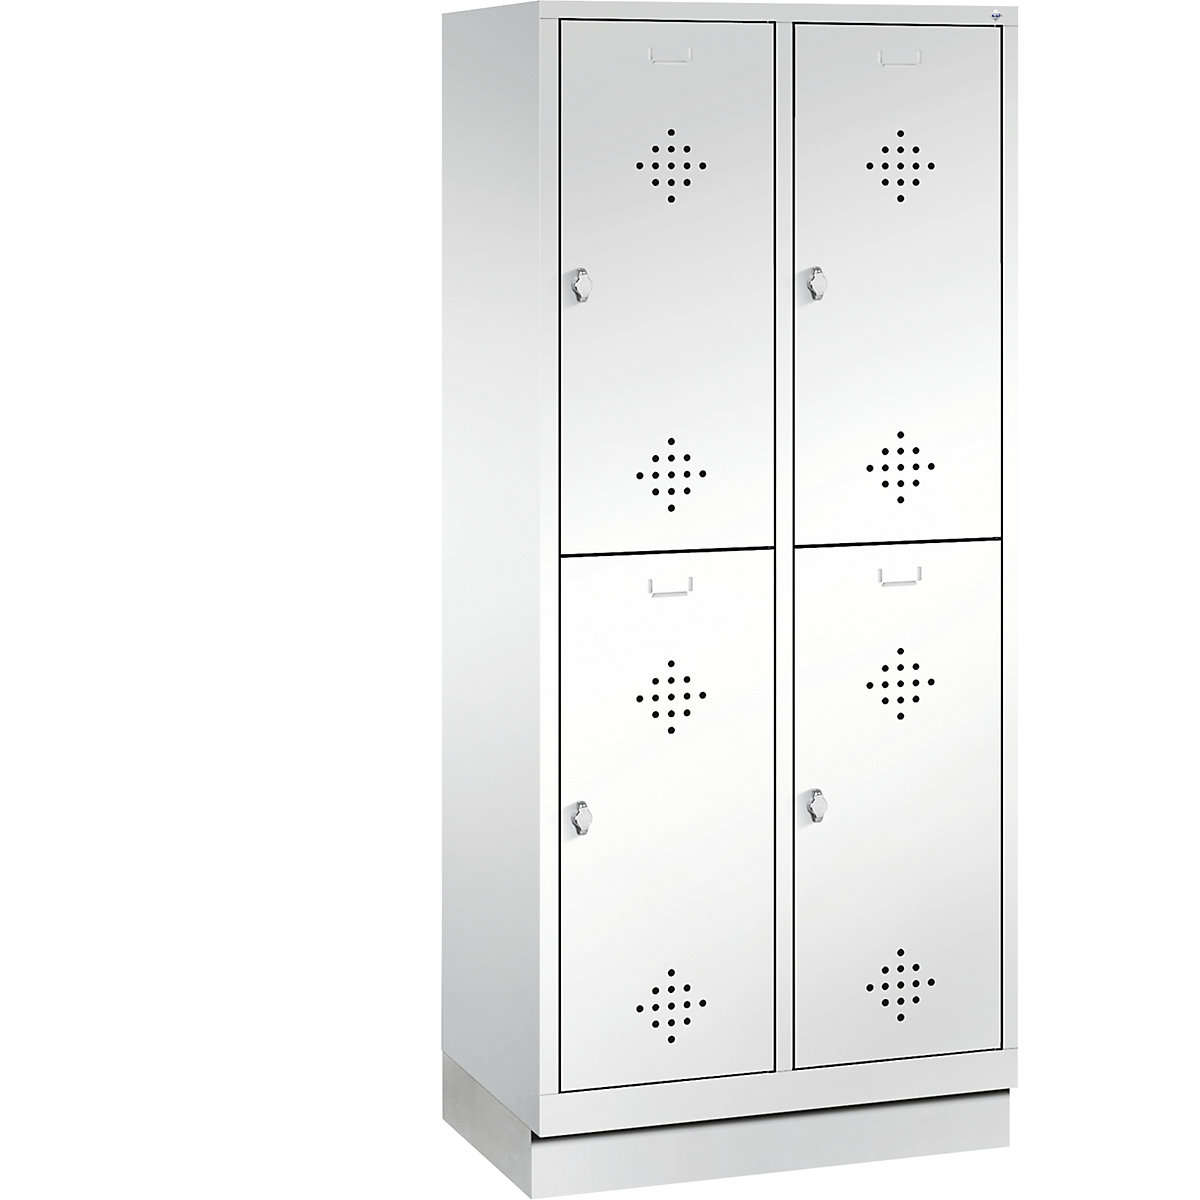 CLASSIC cloakroom locker with plinth, double tier – C+P